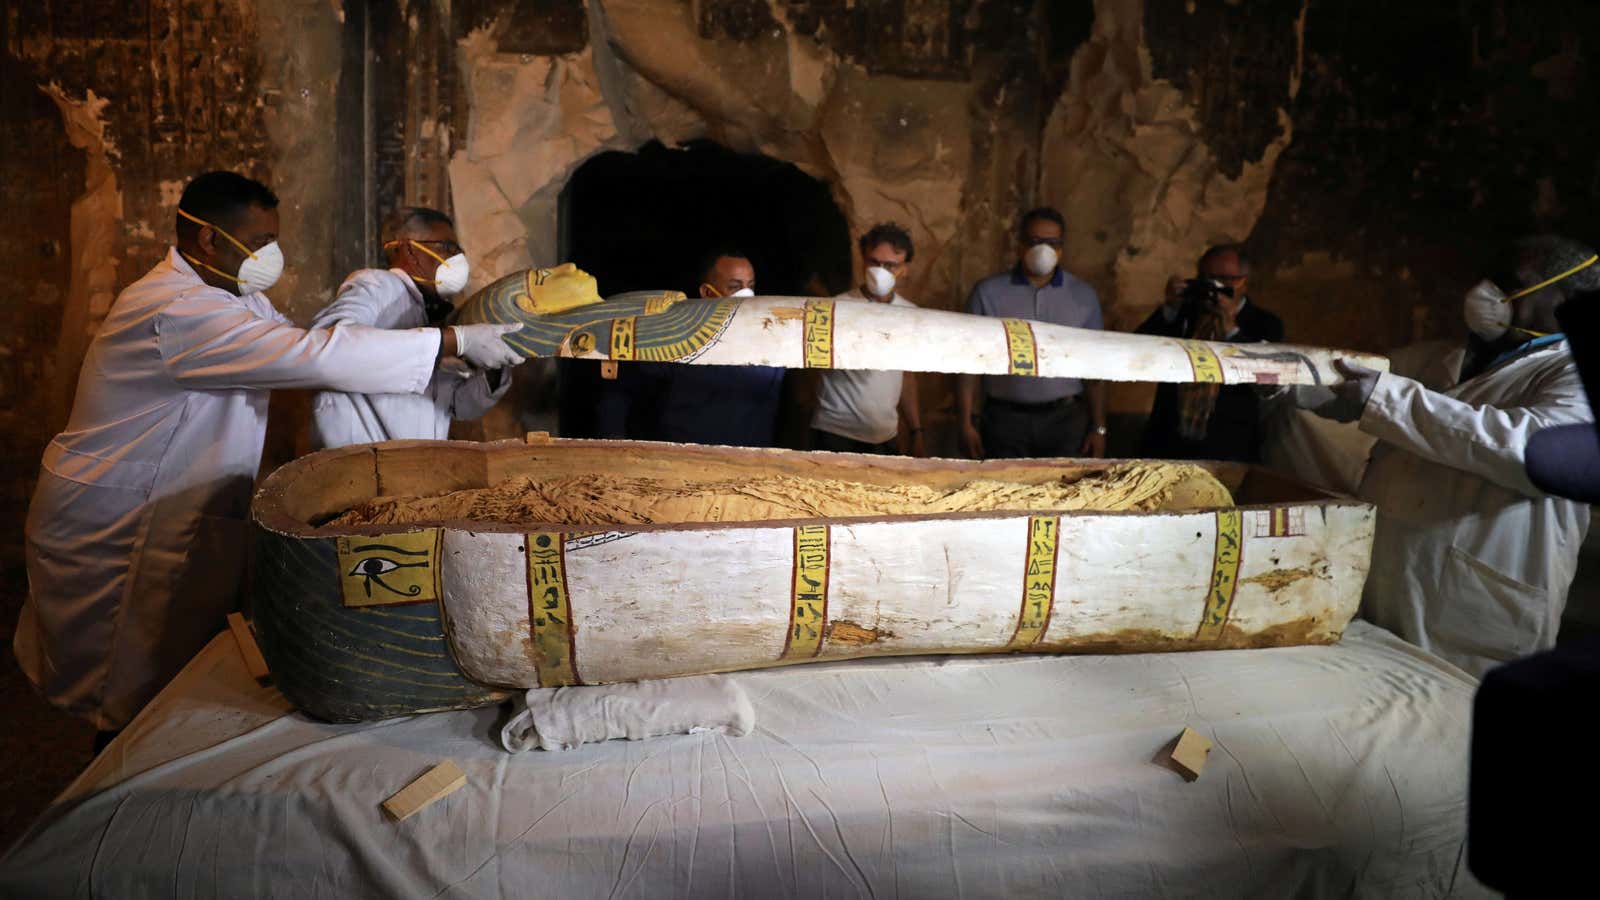 Local archaeologists remove the cover of an intact sarcophagus inside a tomb in Luxor, Egypt Nov. 24, 2018.